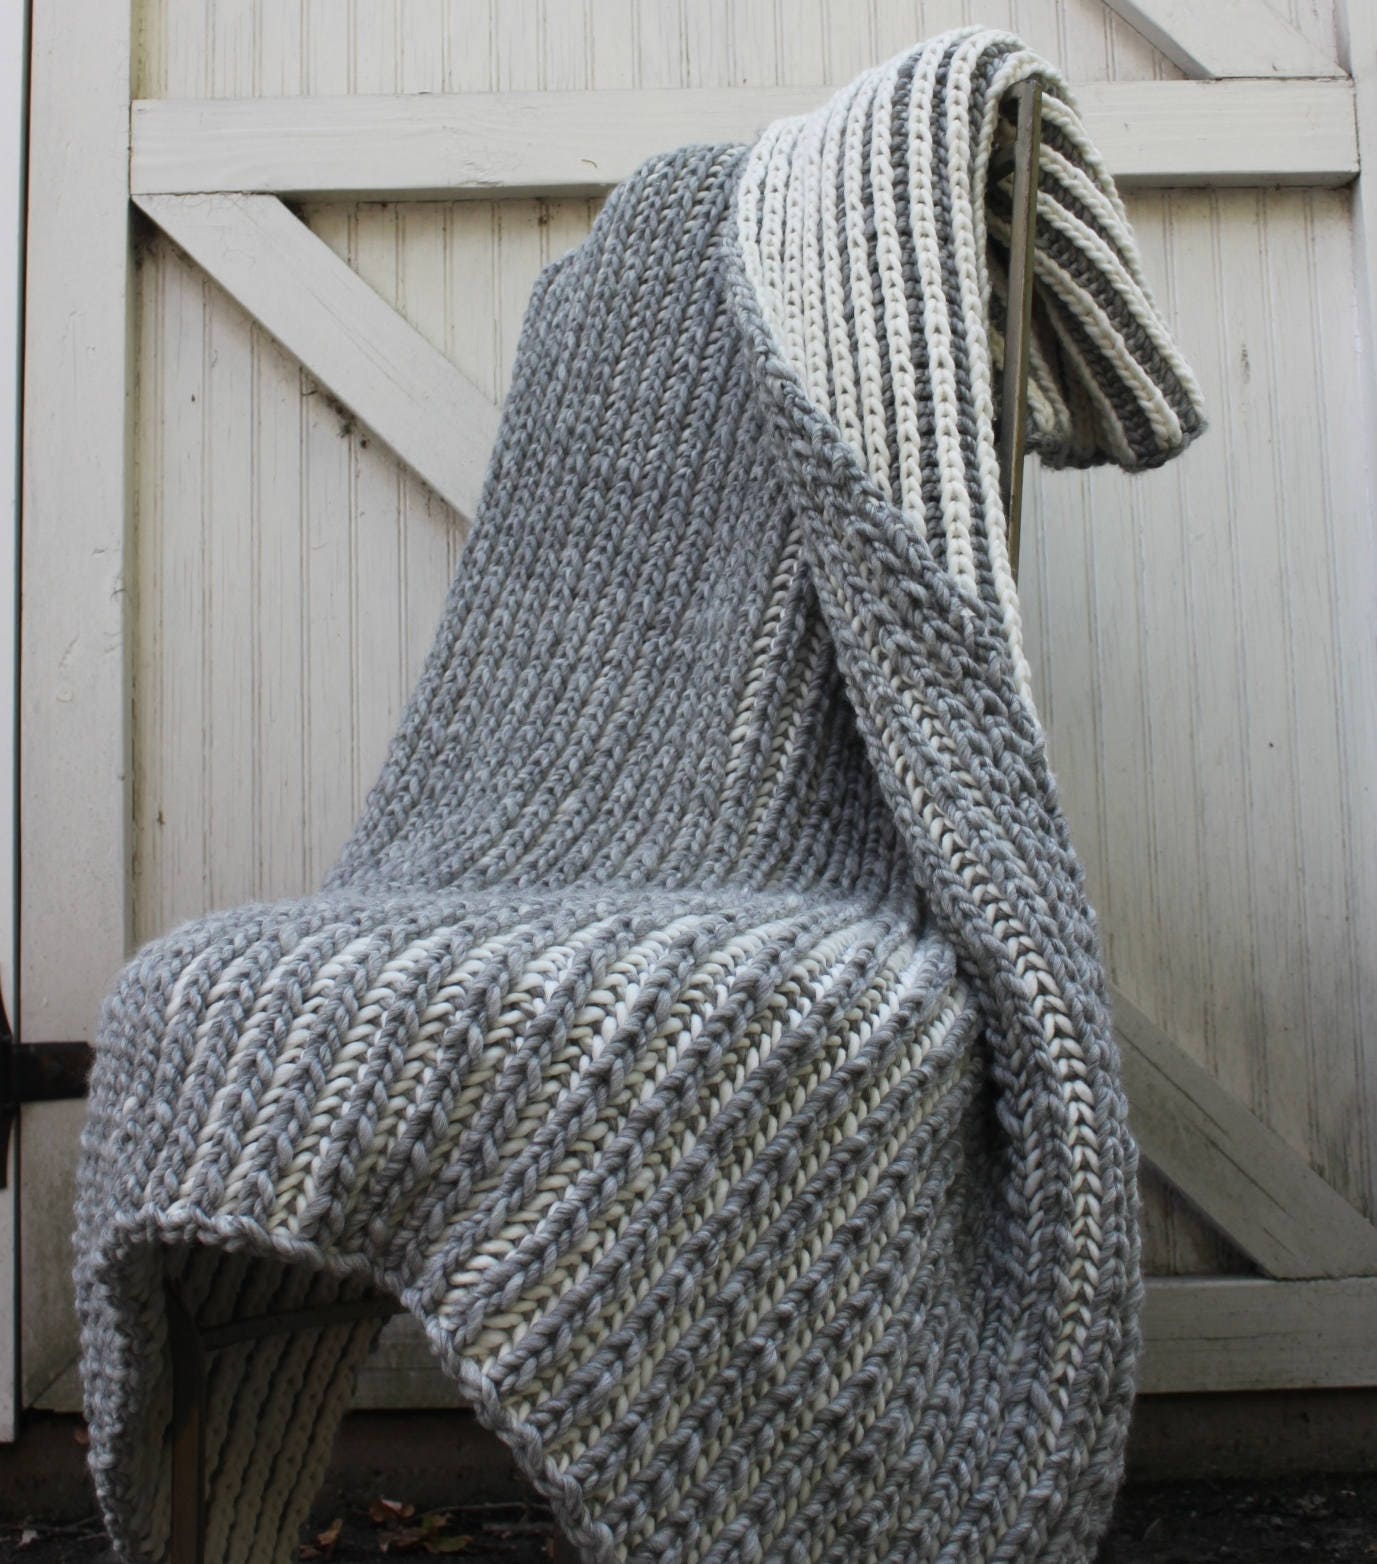 Knitting Pattern-the Brighton Hood 12/18 Months-2, 3/4, 5/7, 8/12, Teen/sm.  Adult, Adult Sizes 